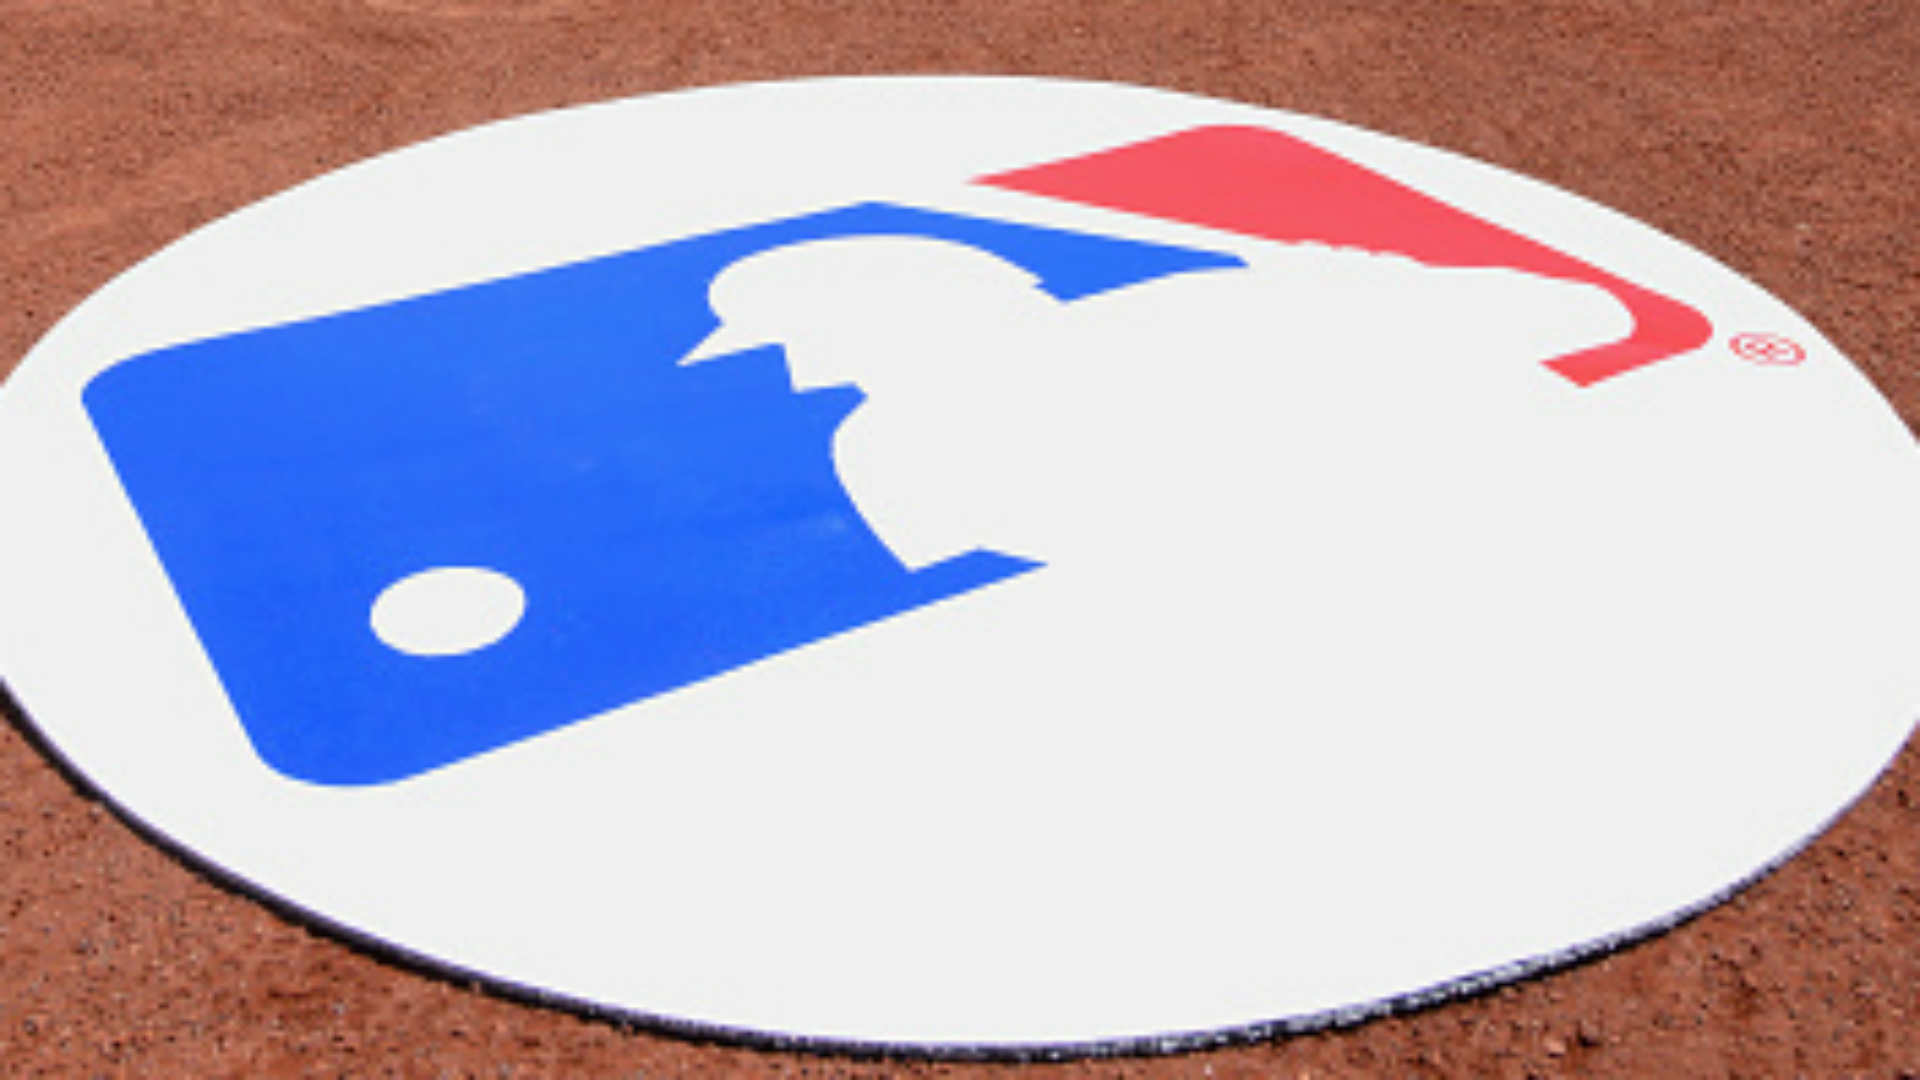 MLB, players union near deal to expand active rosters to ...